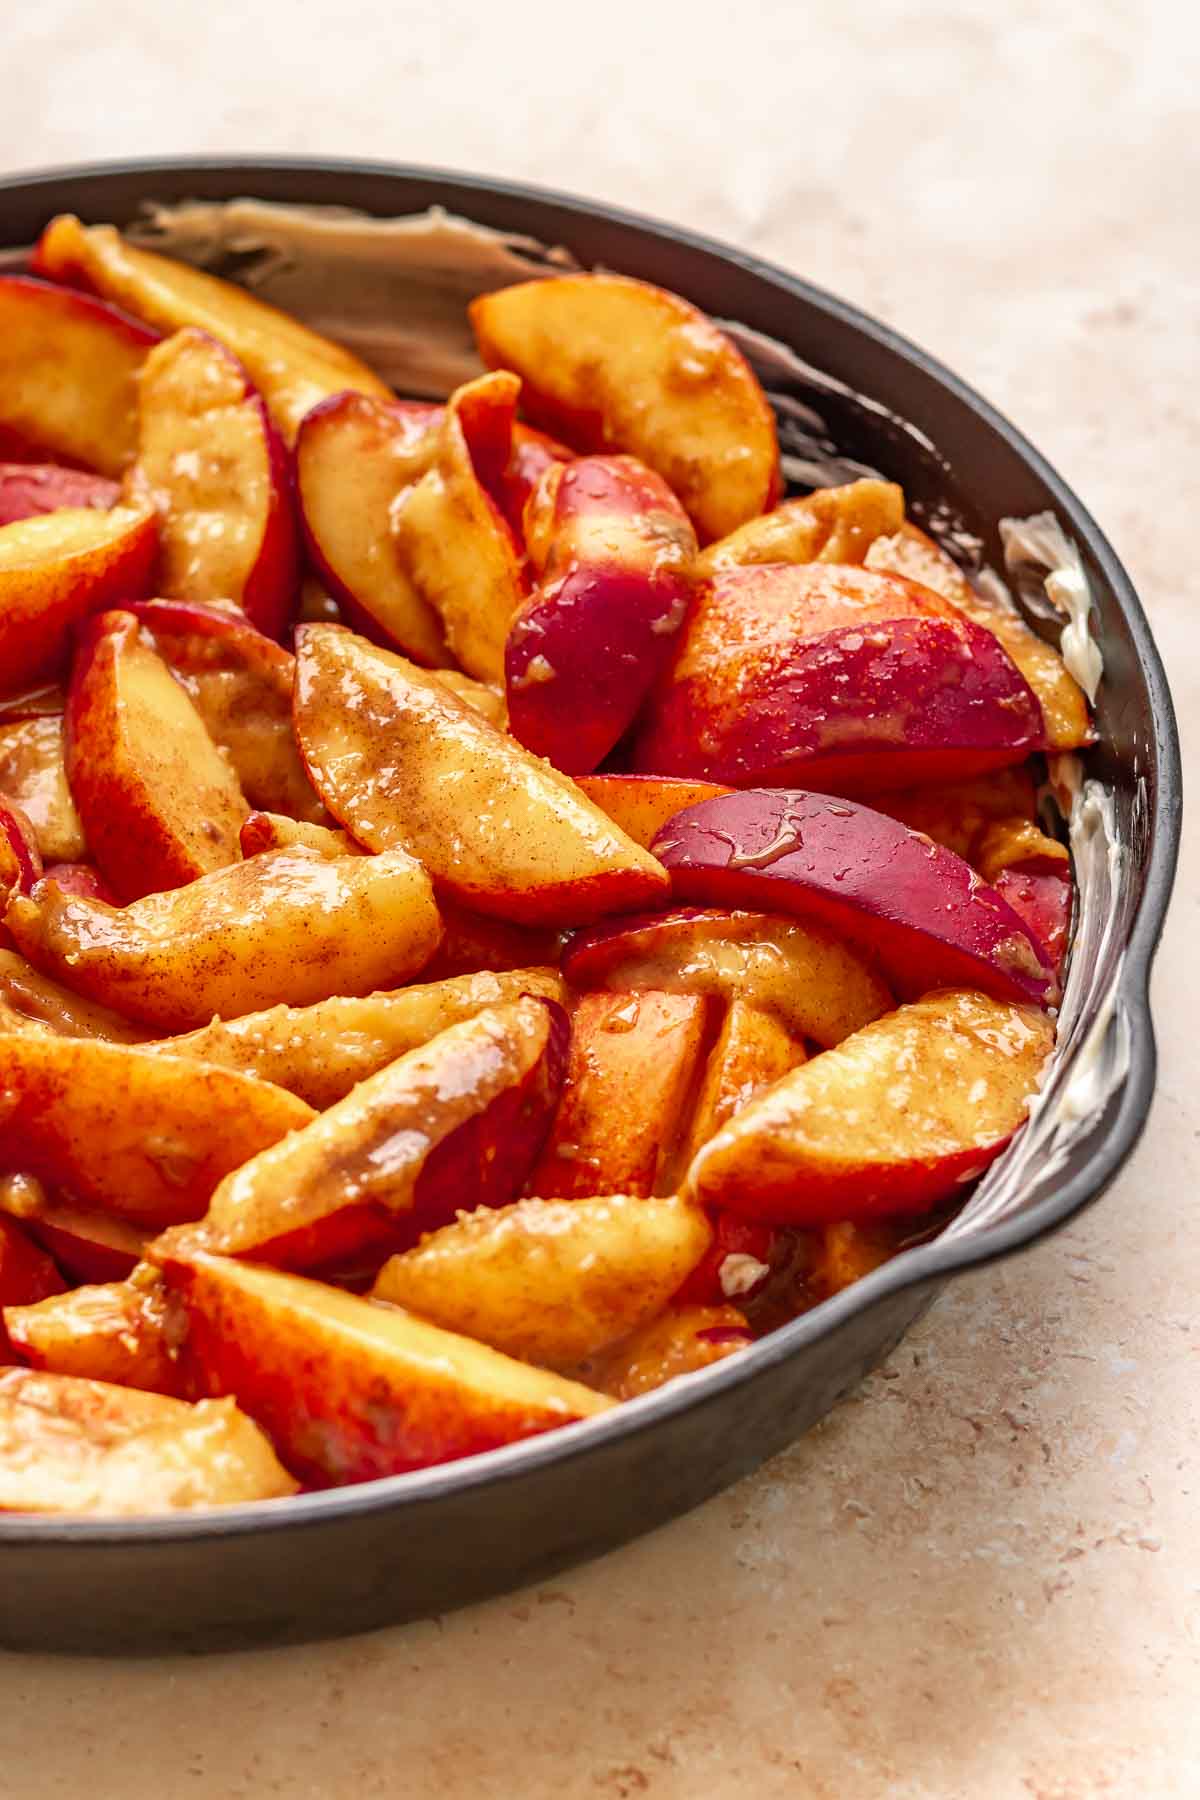 Spiced peach slices in a cast iron skillet.